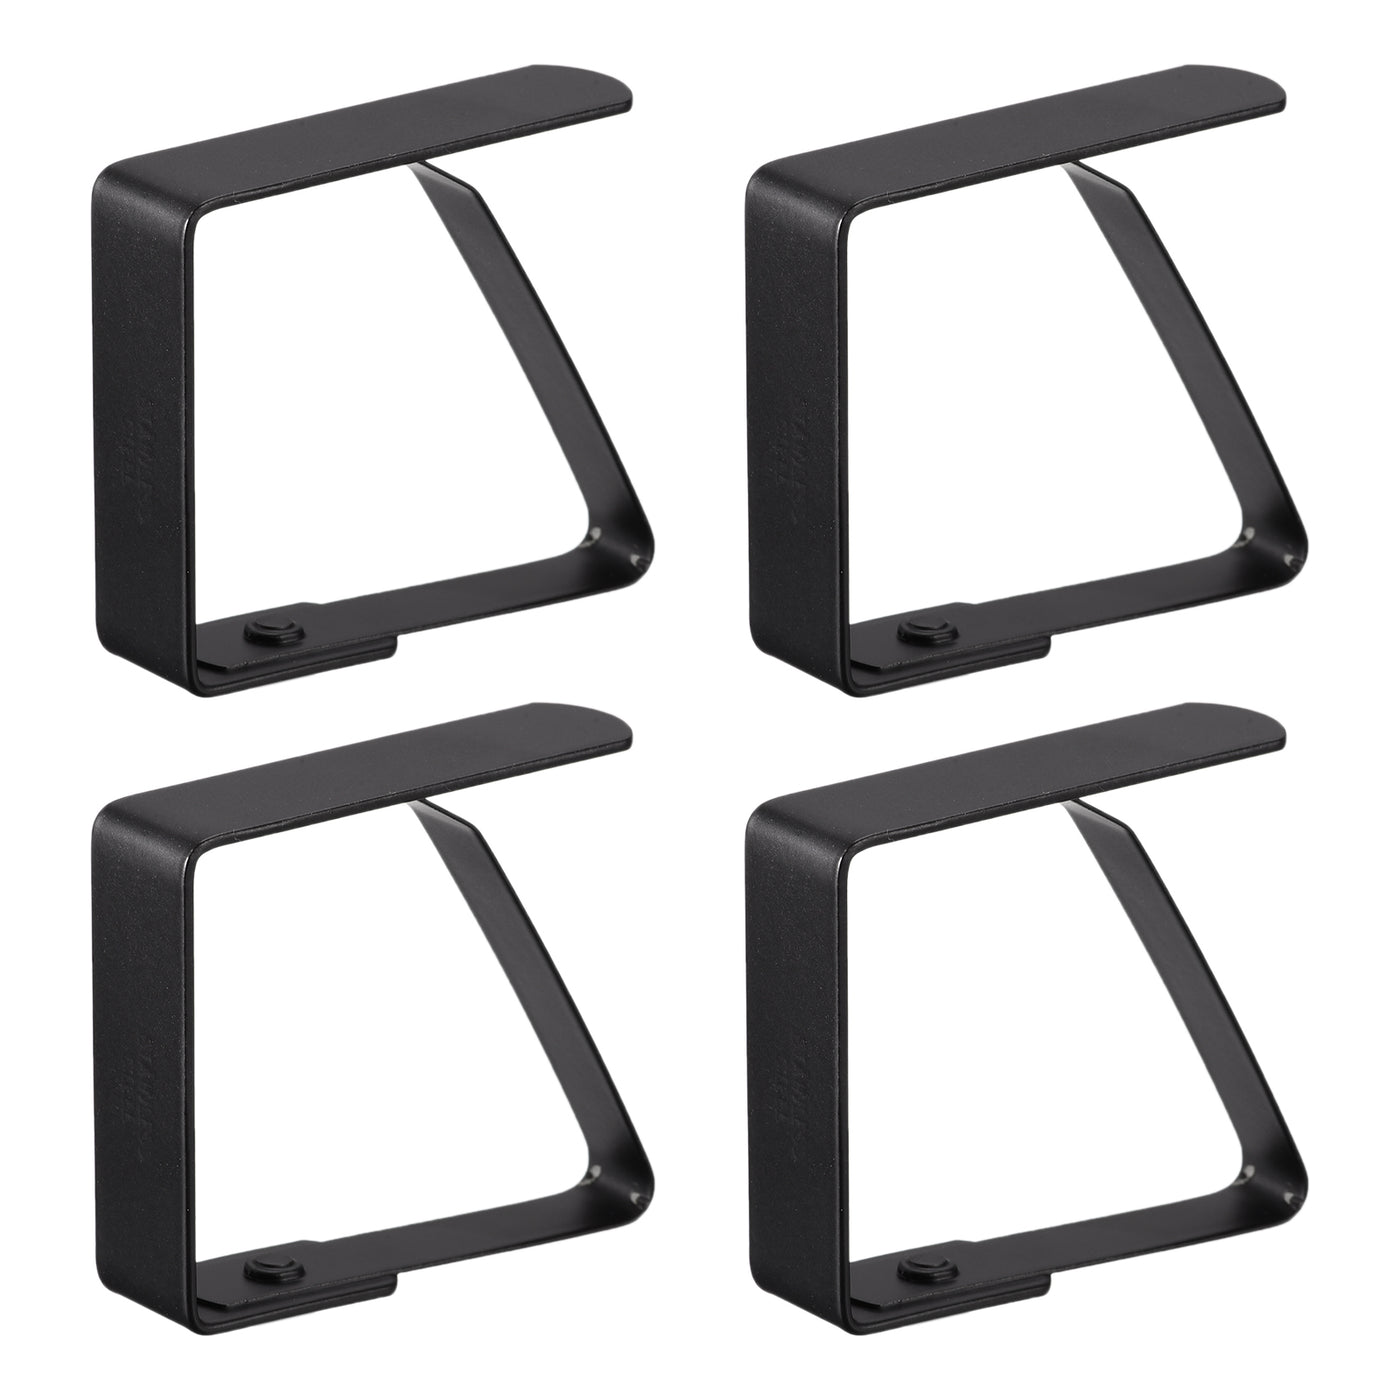 uxcell Uxcell Tablecloth Clips 50mm x 40mm 420 Stainless Steel Table Cloth Holder Black 12 Pcs